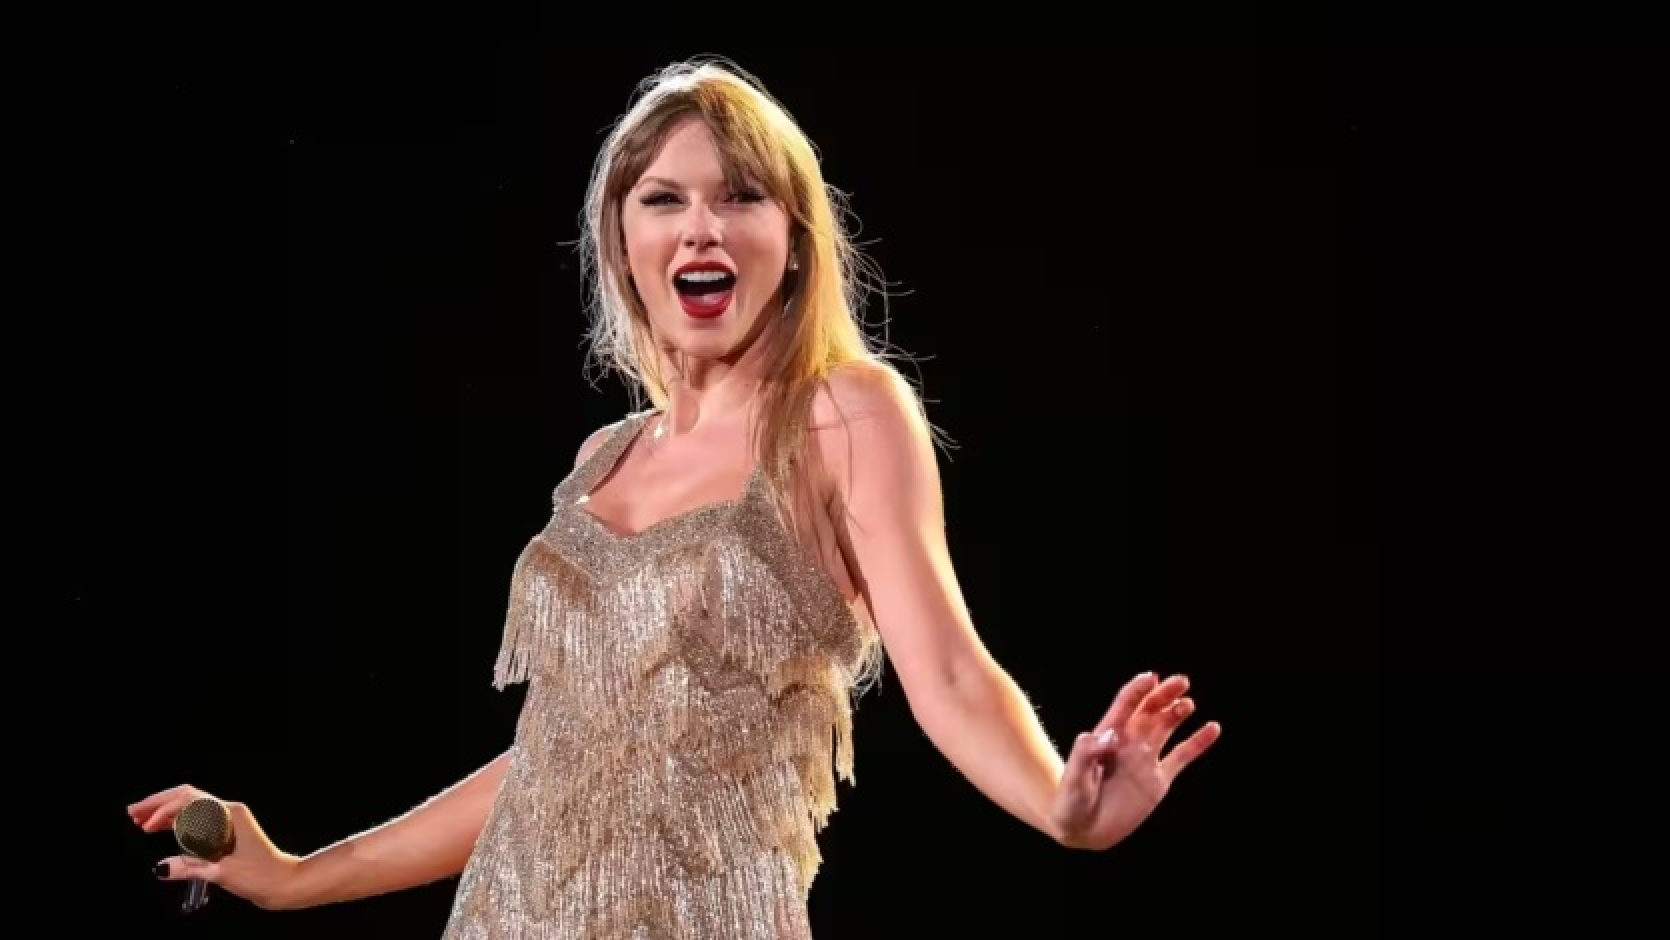 Heart Institute researchers say Taylor Swift's music could help save lives